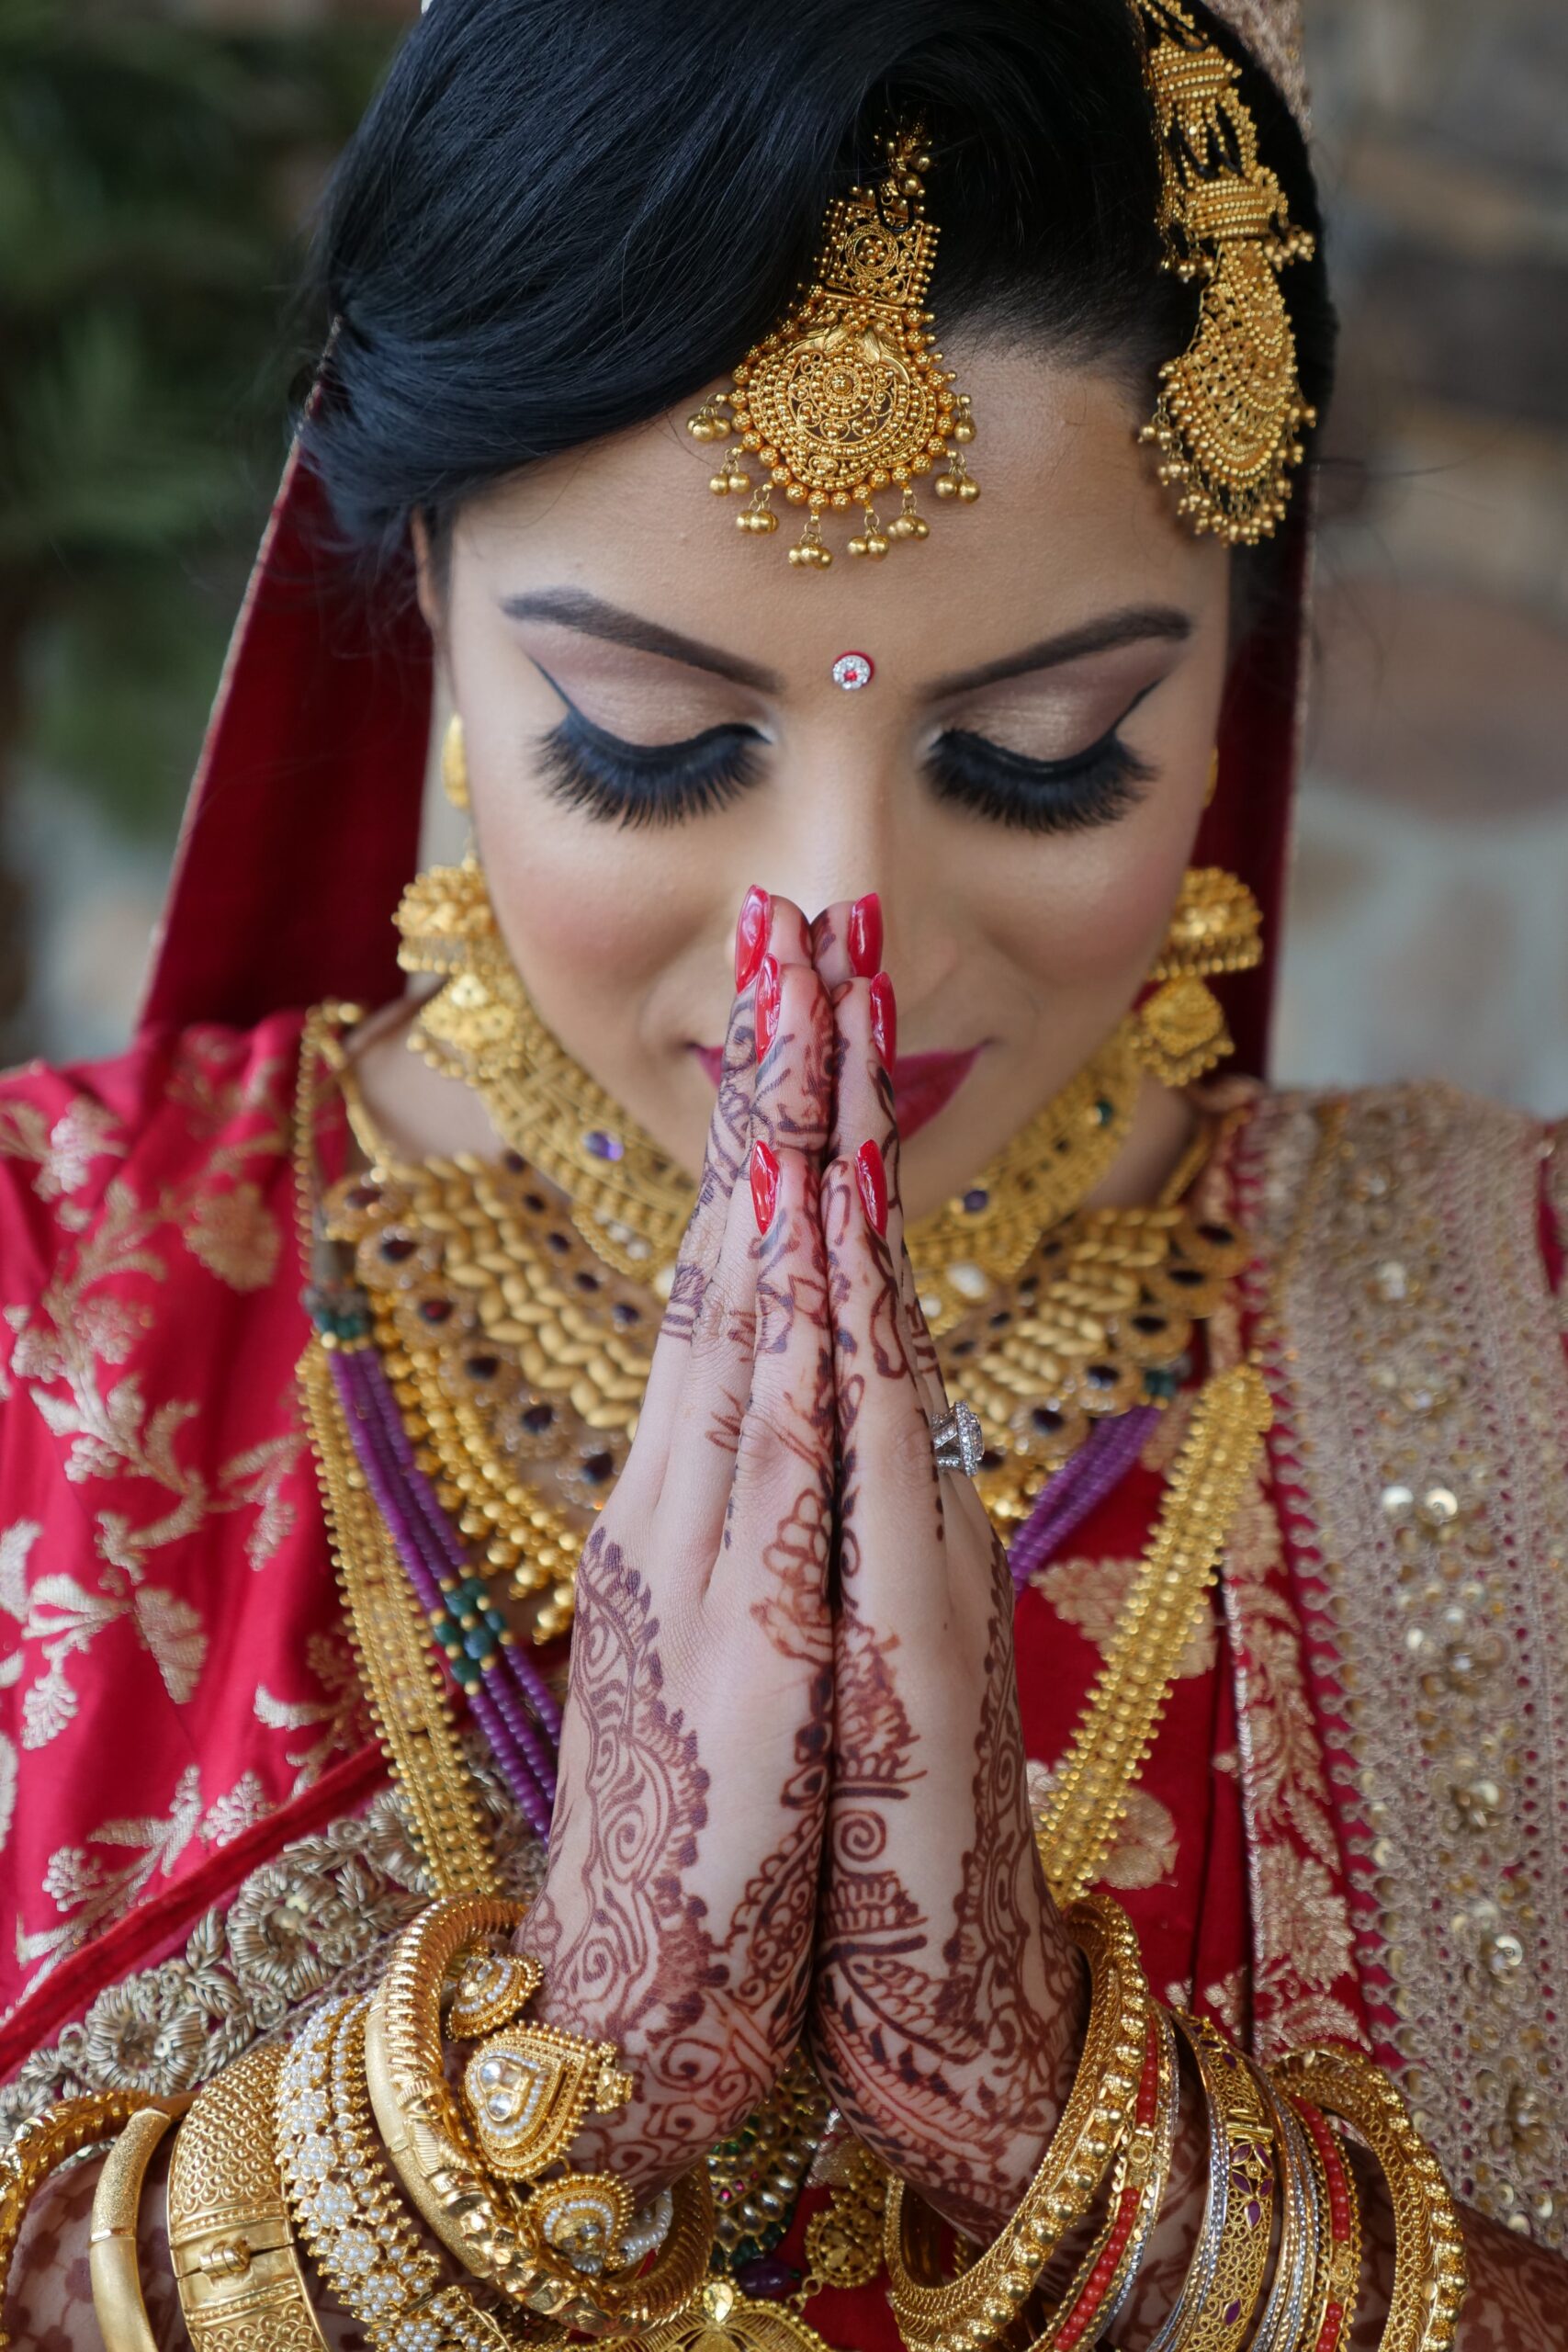 Indian Bride with Namasthe gesture